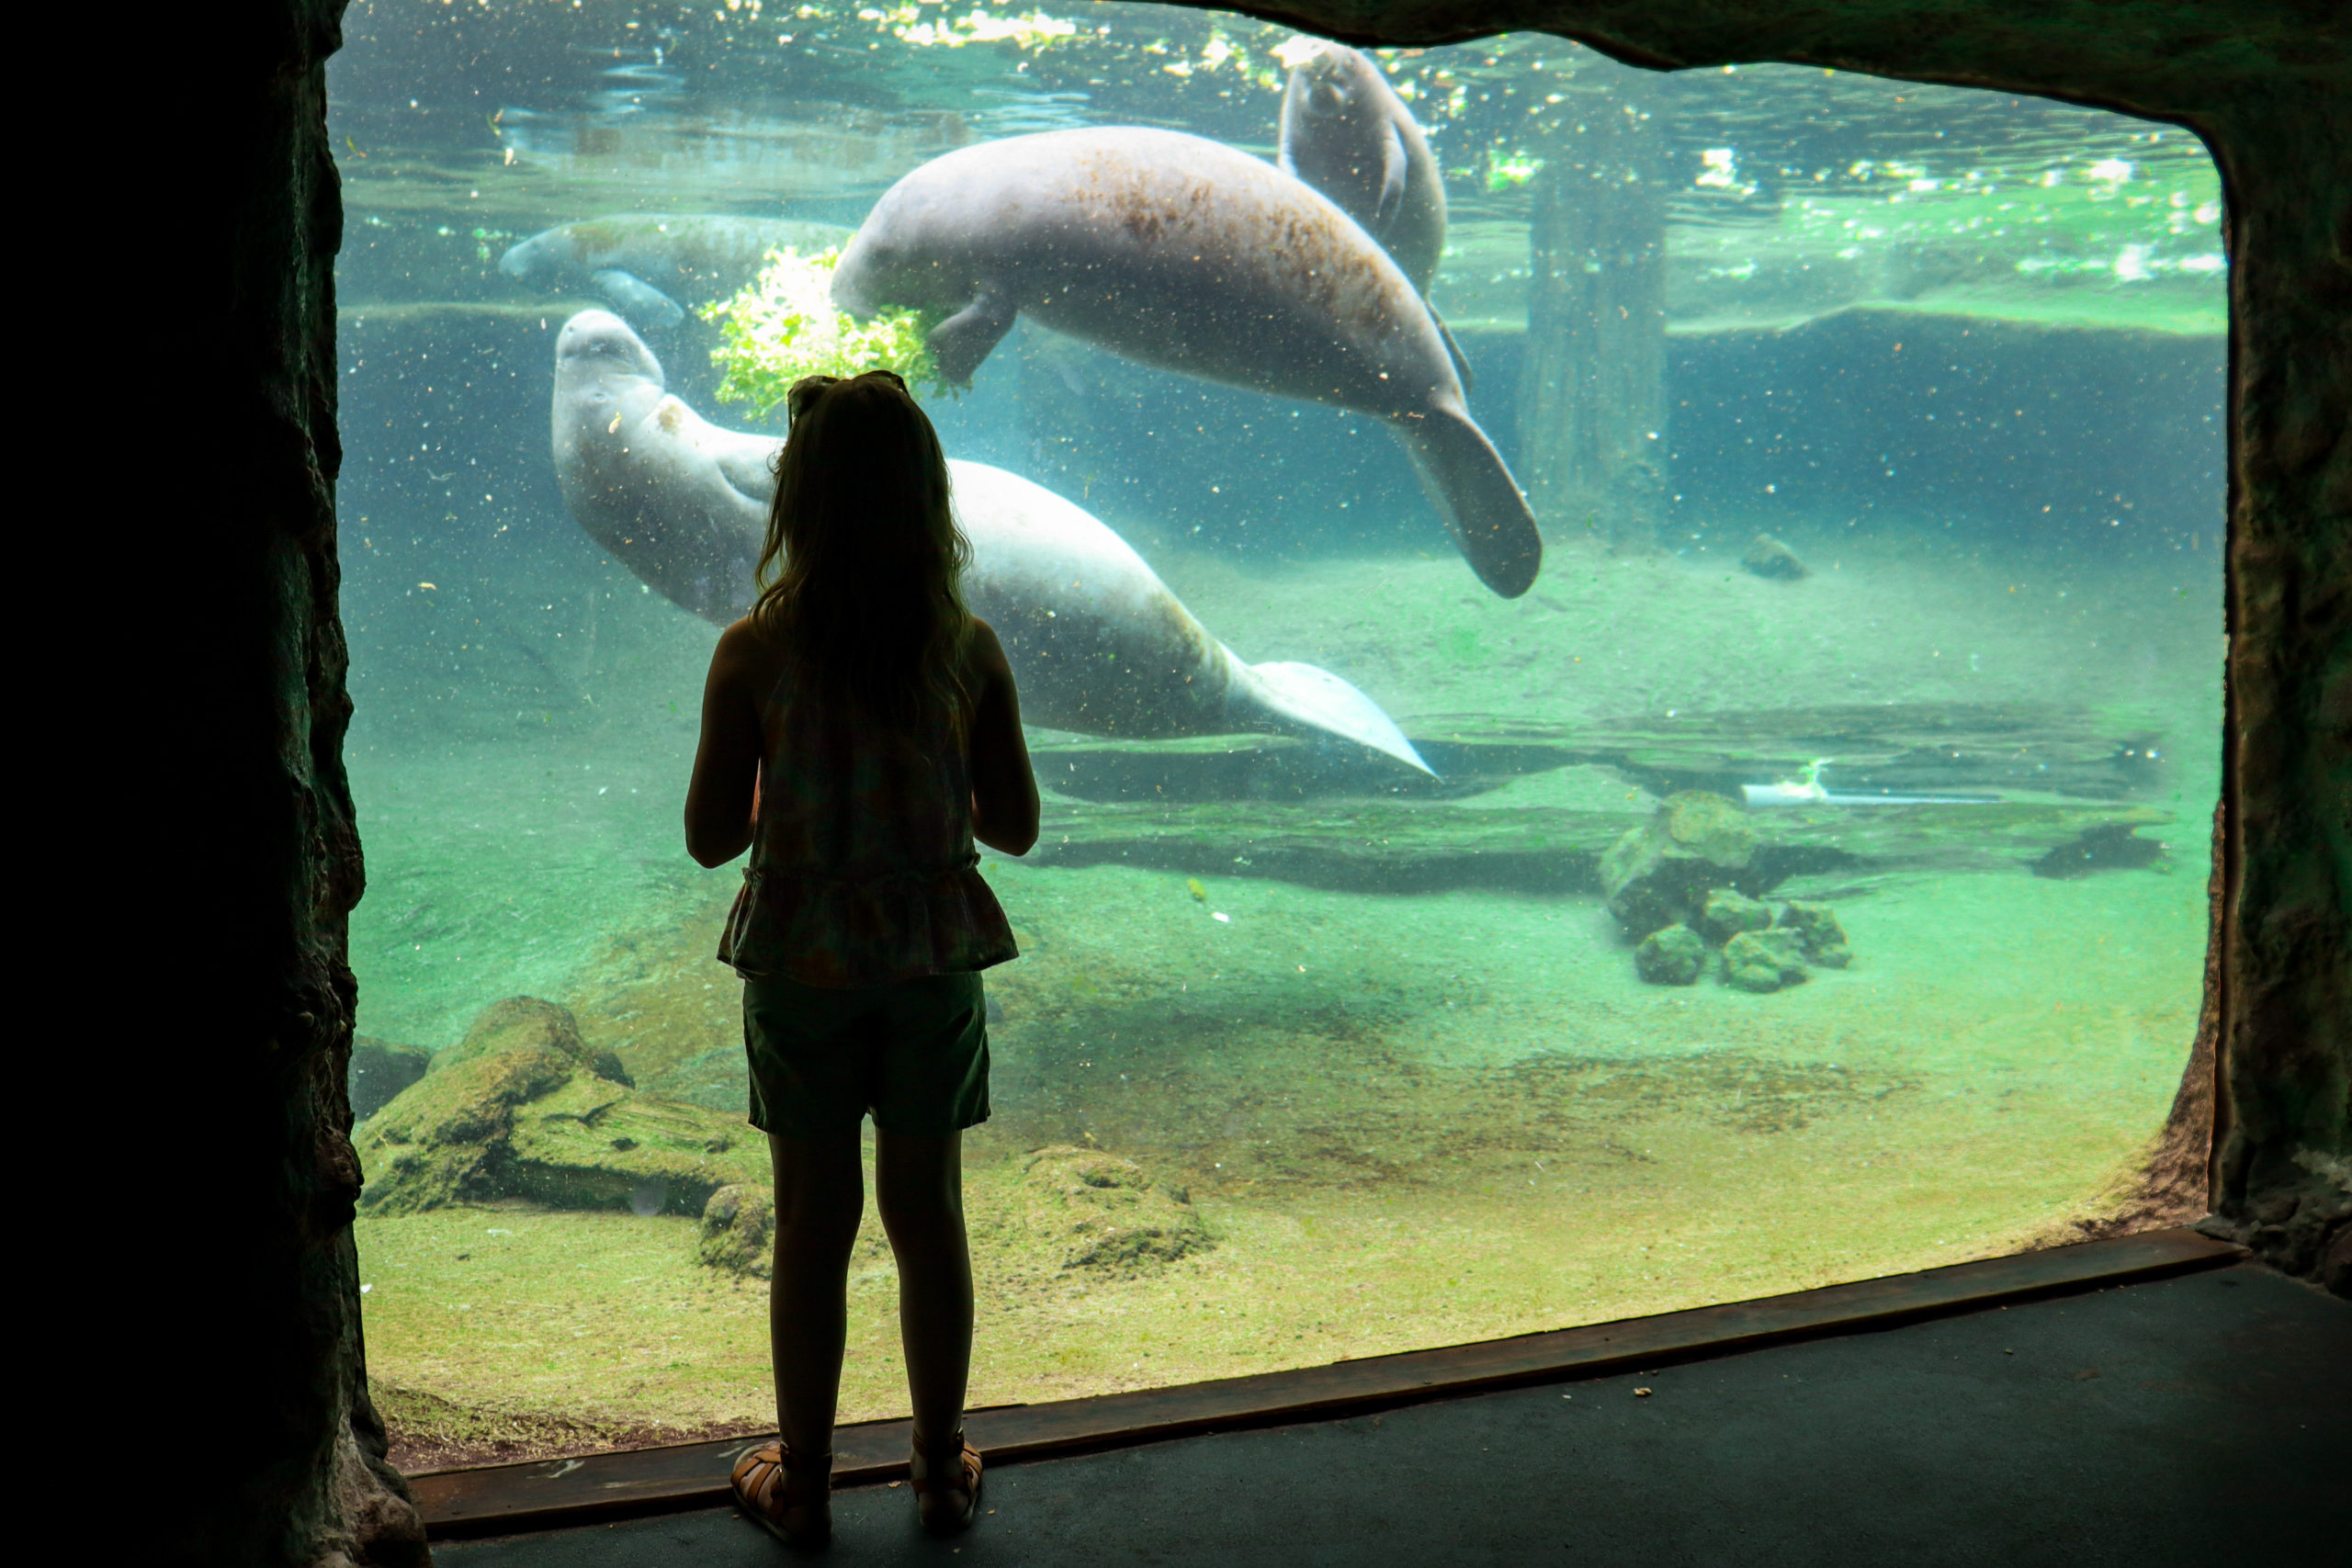 A young girl watches two manatees eat within their habitat at ZooTampa, a must do when you visit Tampa Bay with Kids.